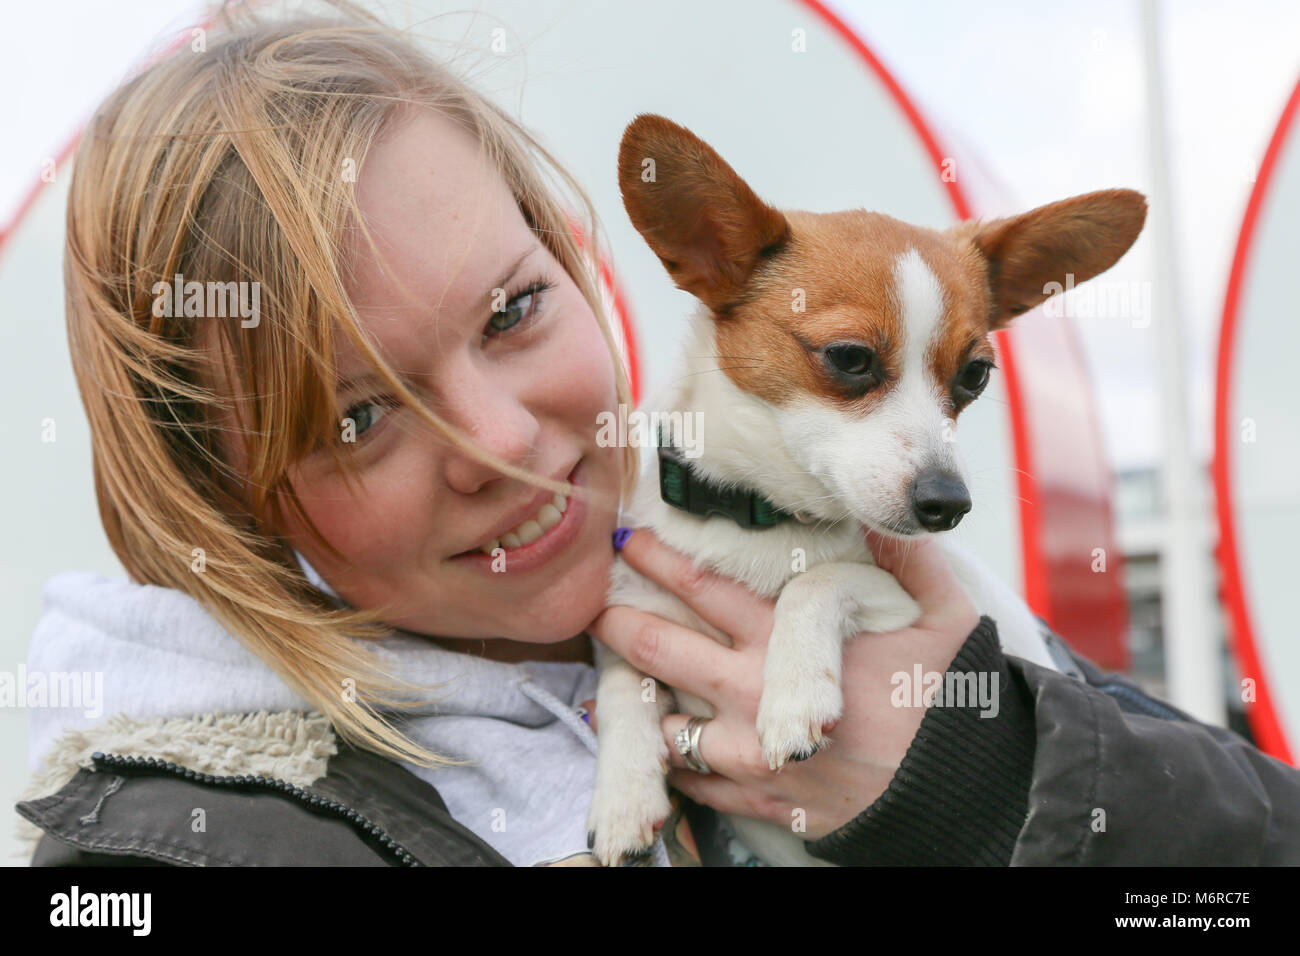 At the launch of Crufts 2018 at the NEC, Birmingham, Envy, a Papillon and Jack Russell cross, is held by her owner Megan Smyth. Stock Photo